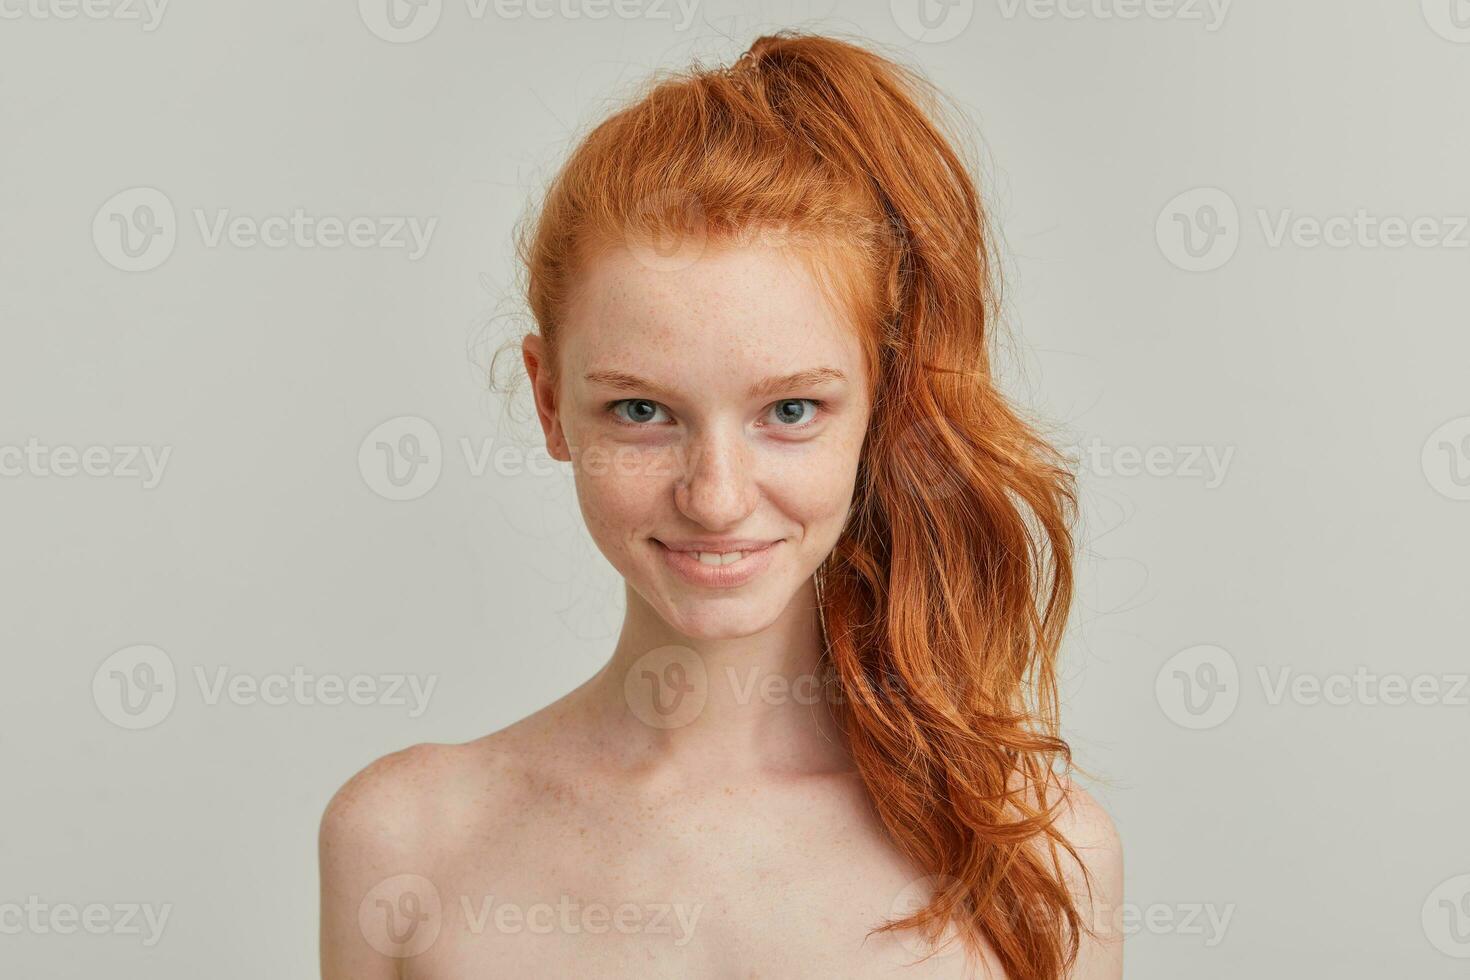 Young lady, pretty woman with ginger pony tail and freckles. Has no make up and stand shirtless. Emotion concept. Watching tempting at the camera, close up isolated over grey background photo